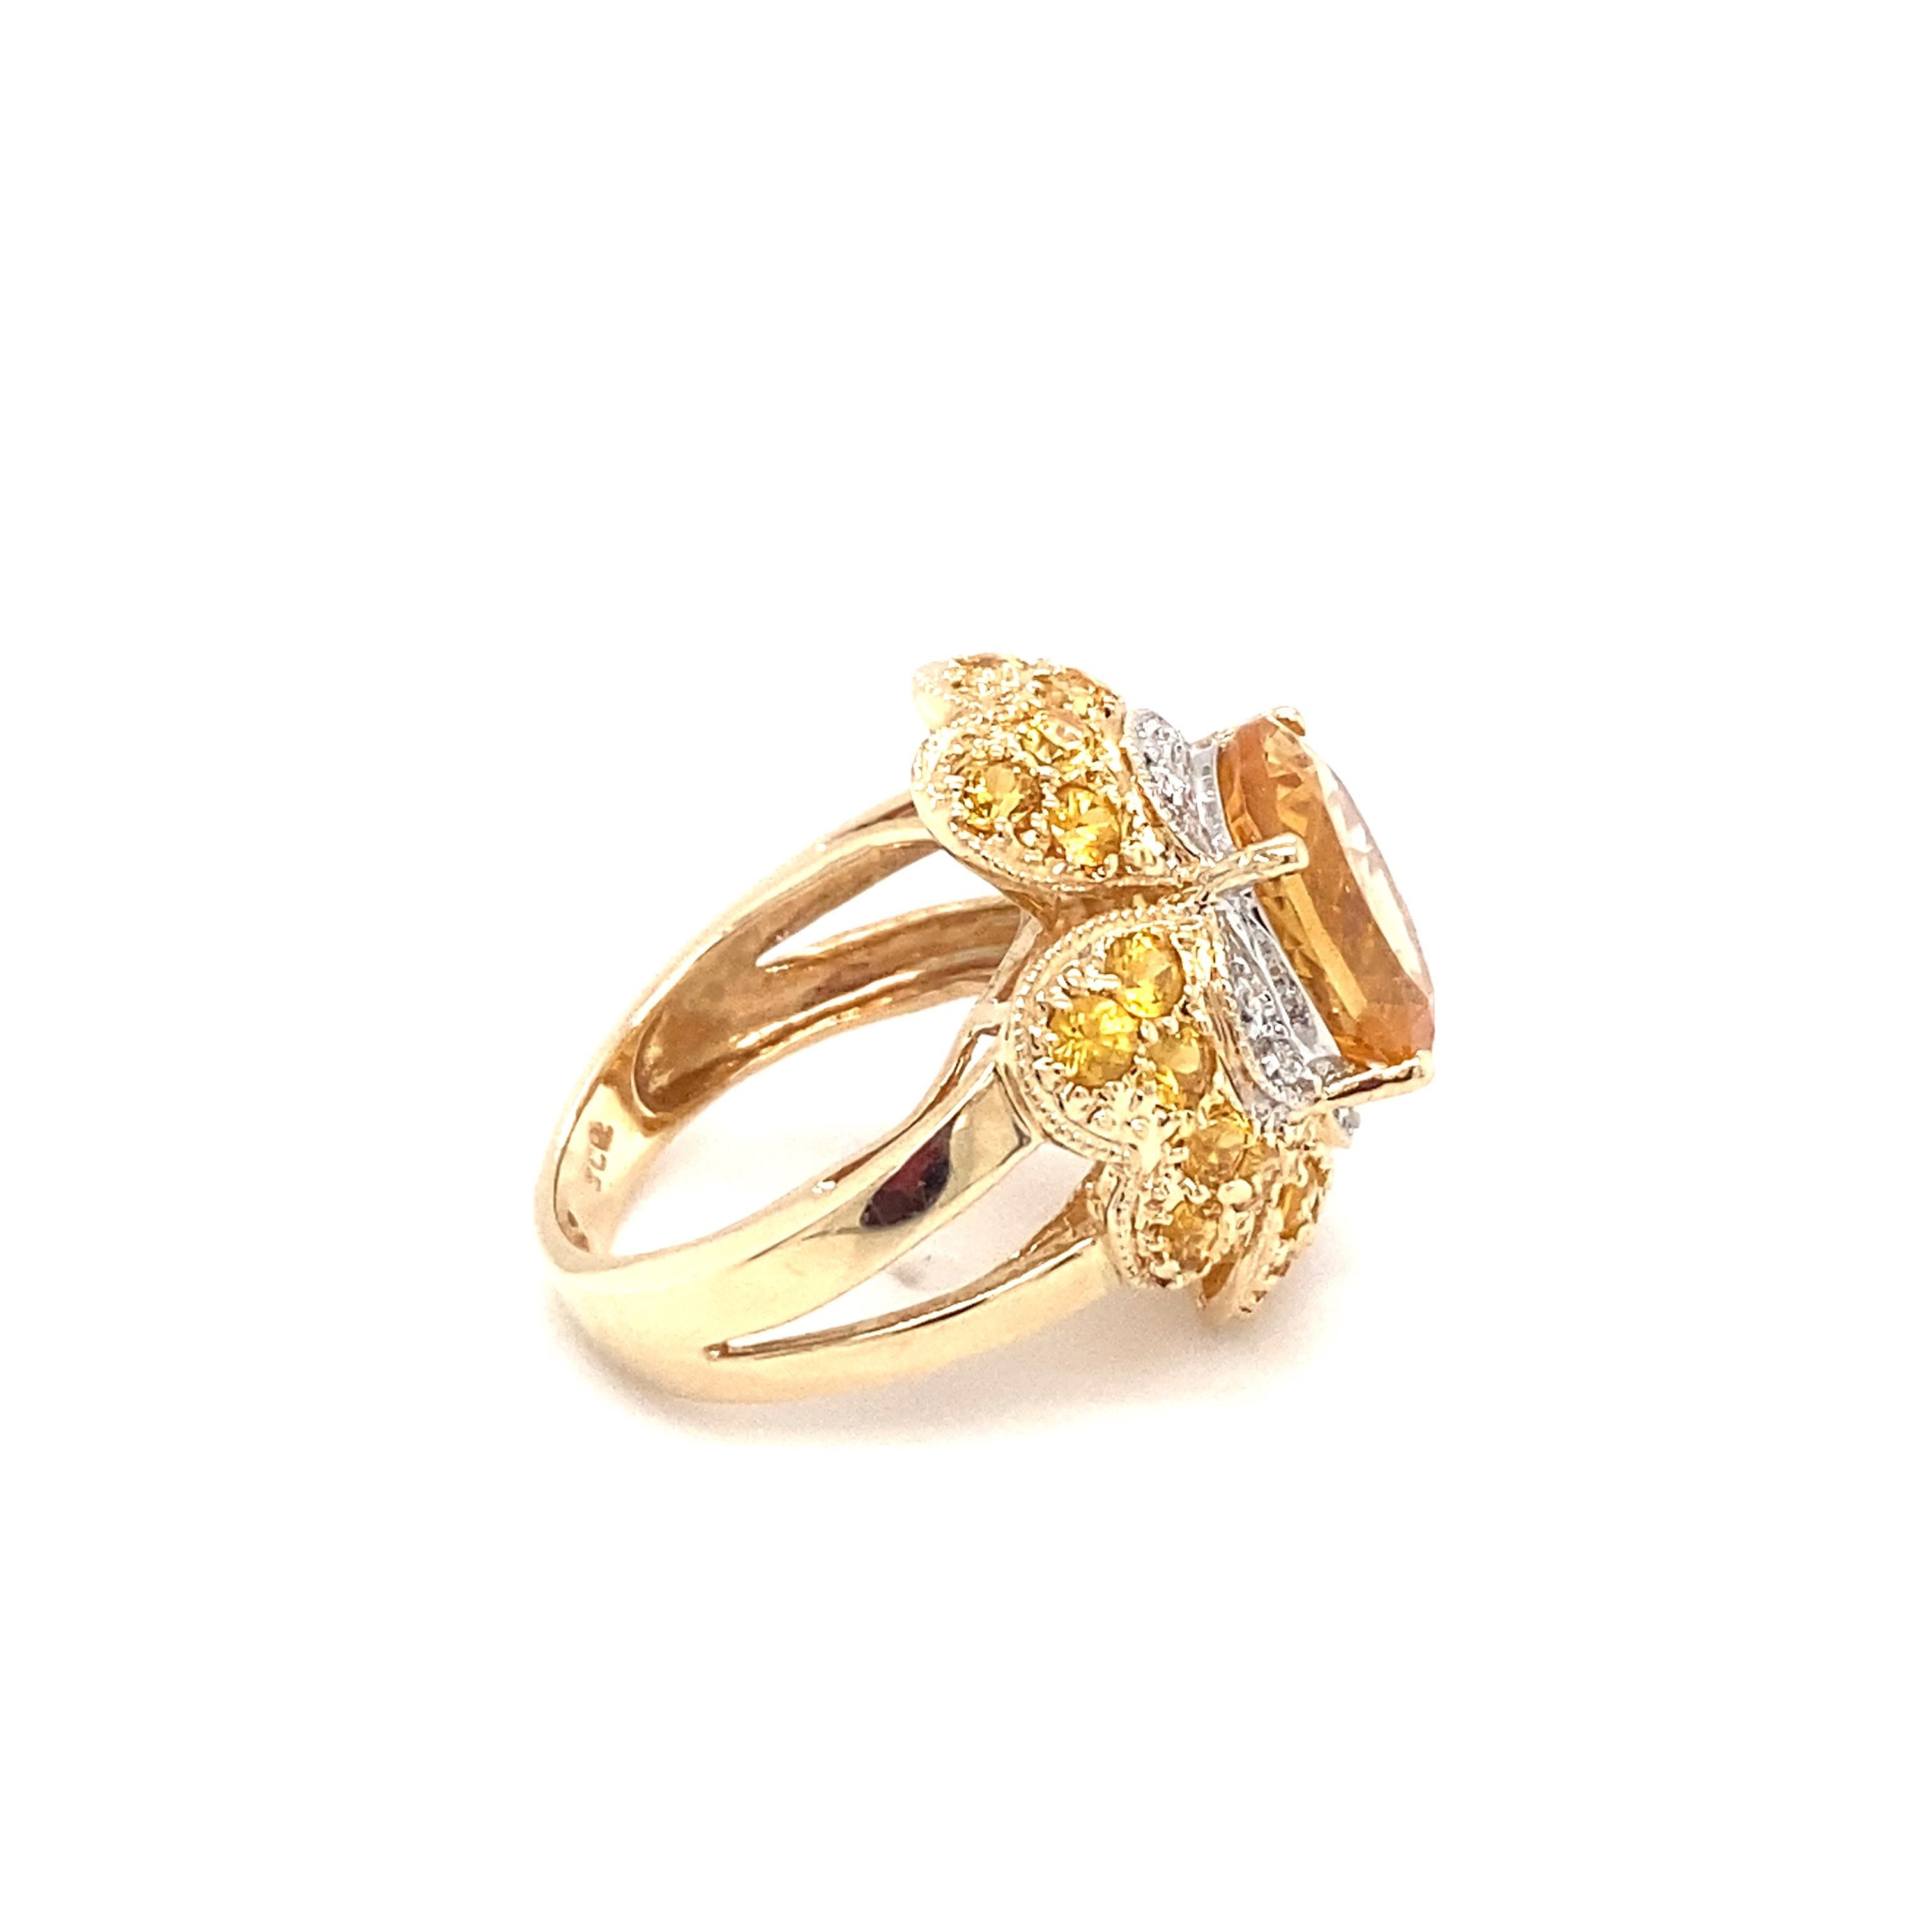 Oval Cut 3 Carat Oval Citrine and Diamond Flower Cocktail Ring in 14 Karat Gold